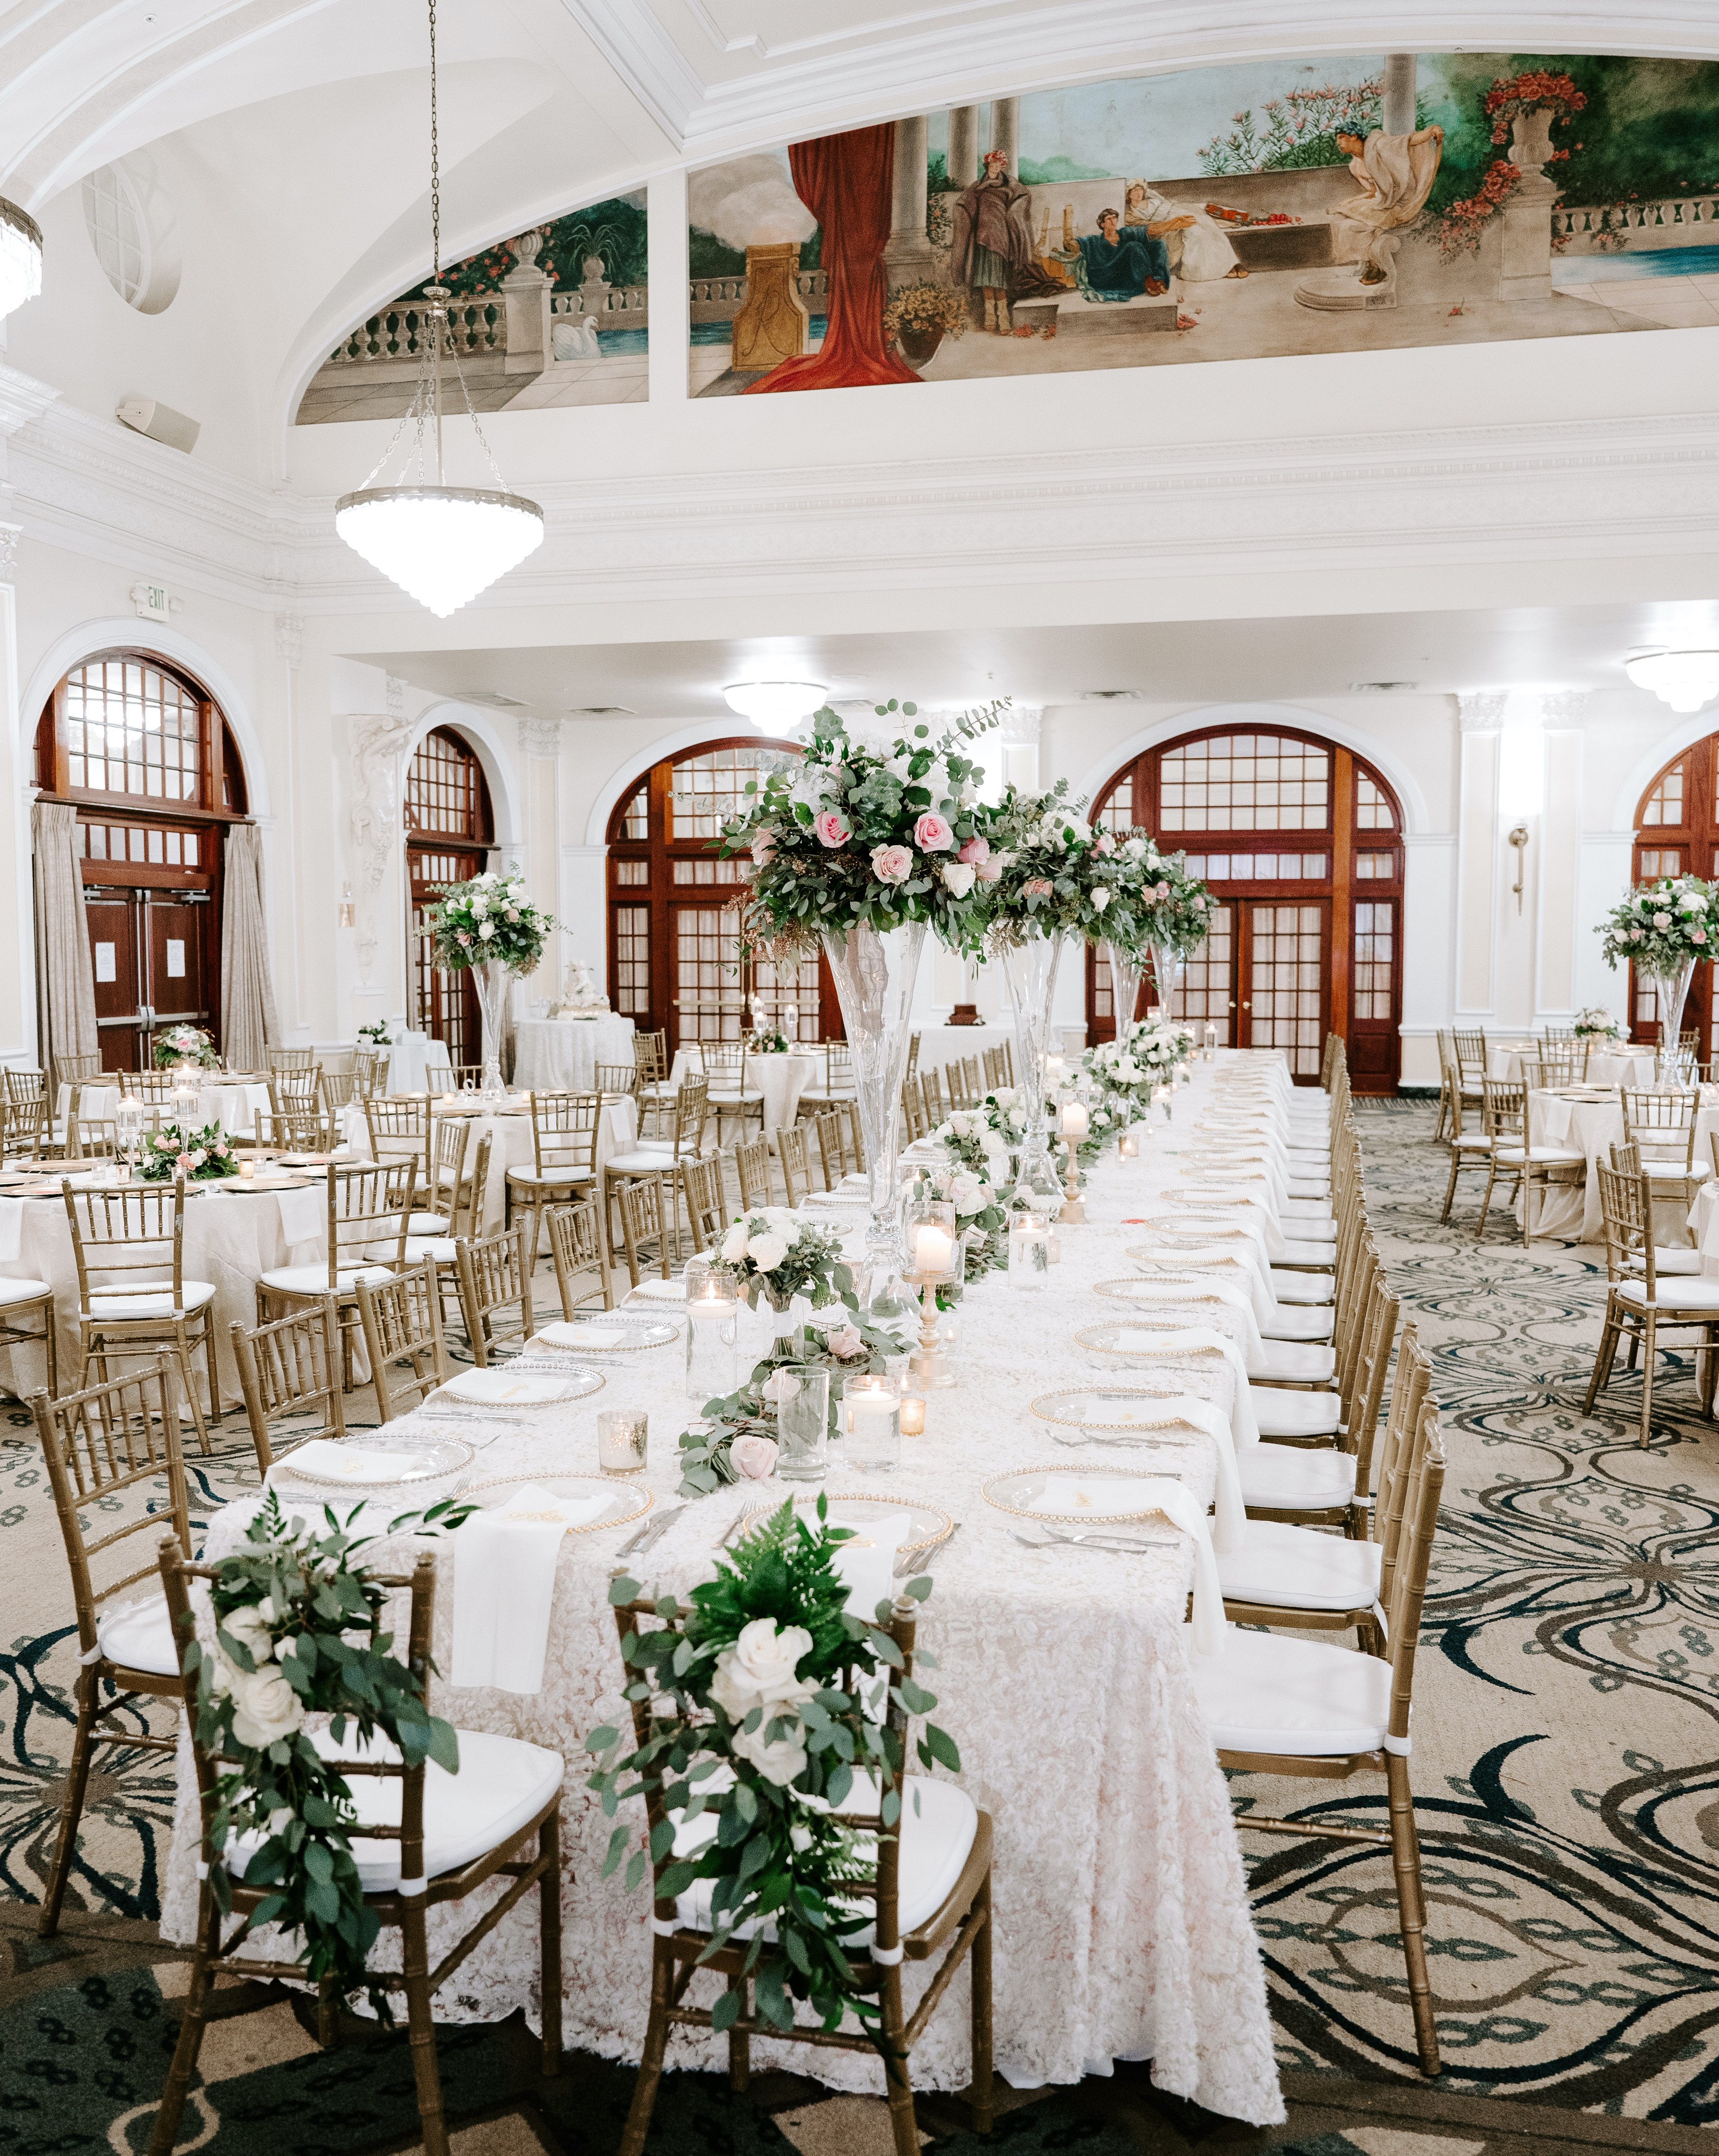 A full view of the reception room for the elegant rainy wedding.